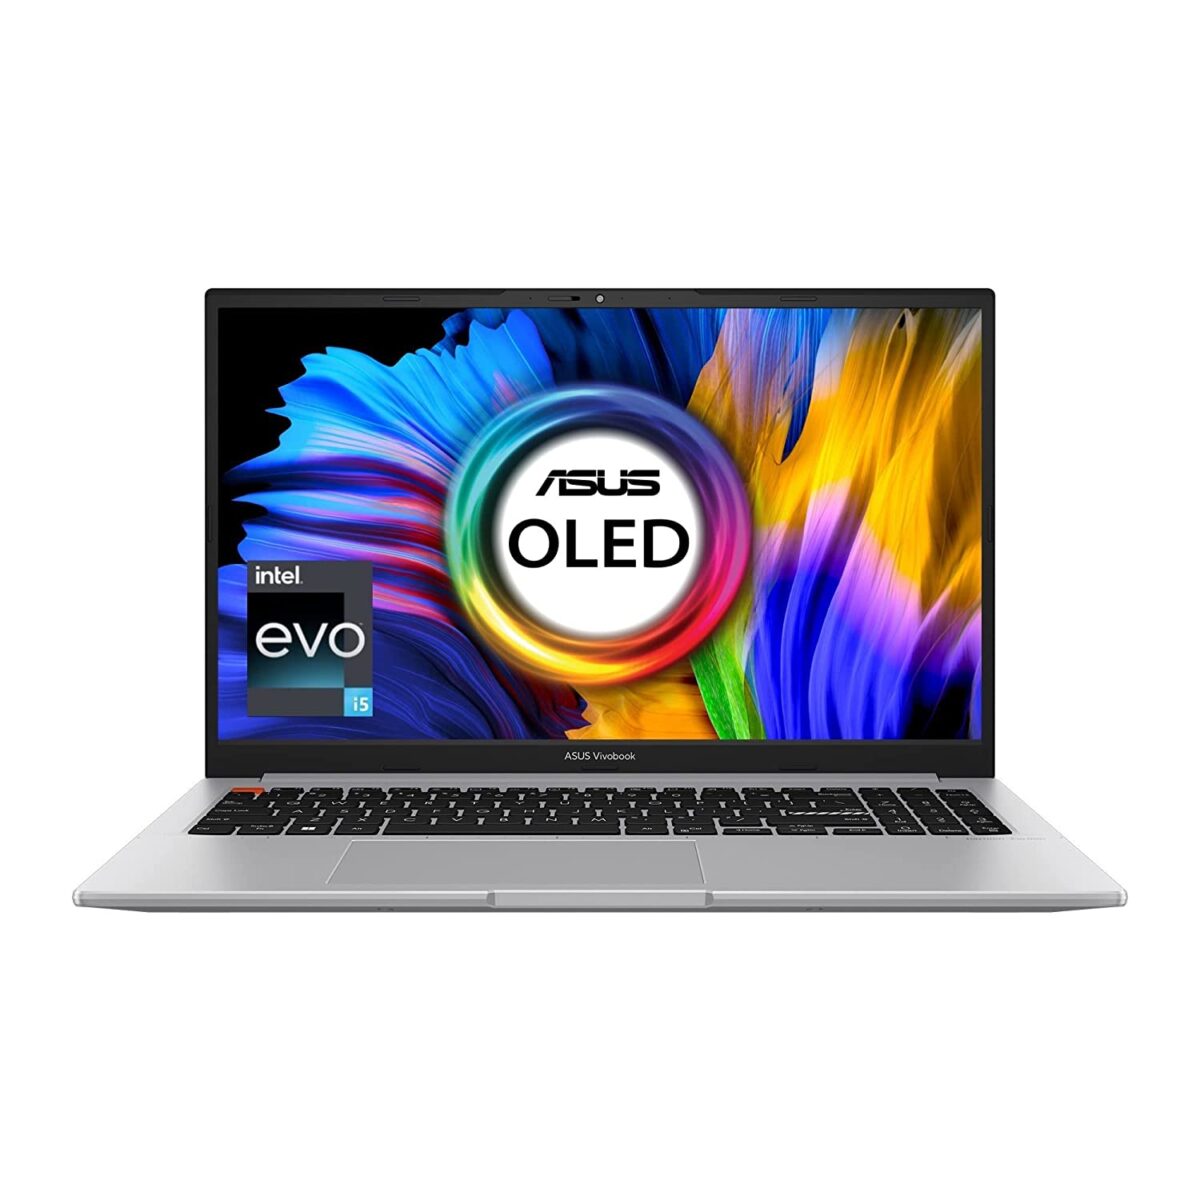 ASUS Vivobook S15 OLED 2022 K3502ZA-L501WS with 12th Gen Core i5-12500H listed on Amazon India | Check Price, Specs